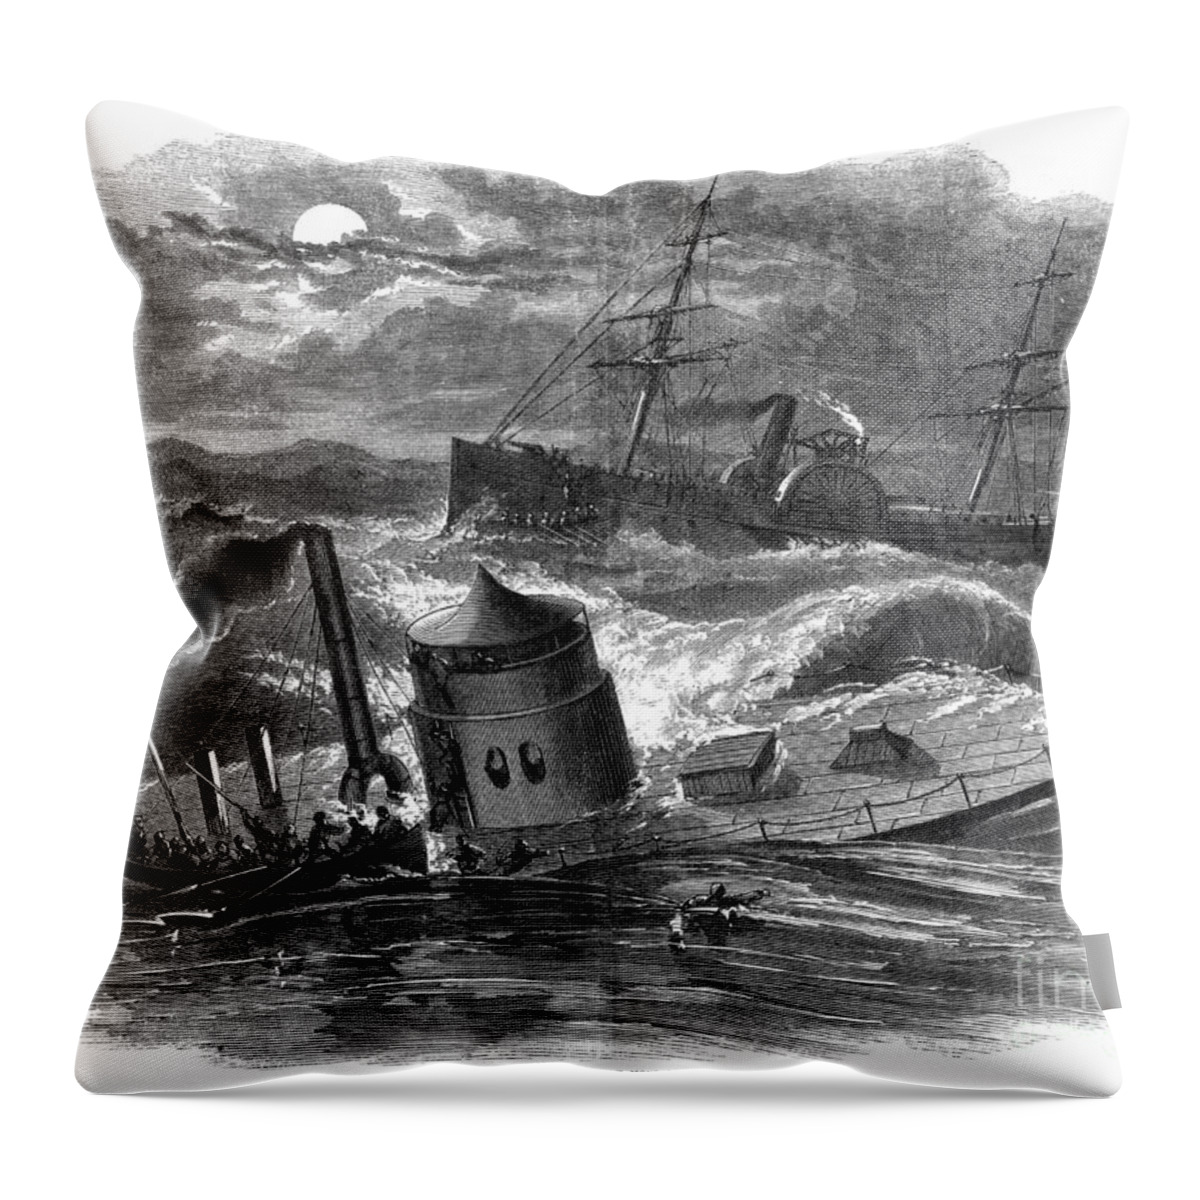 1862 Throw Pillow featuring the photograph Civil War: Monitor Sinking by Granger